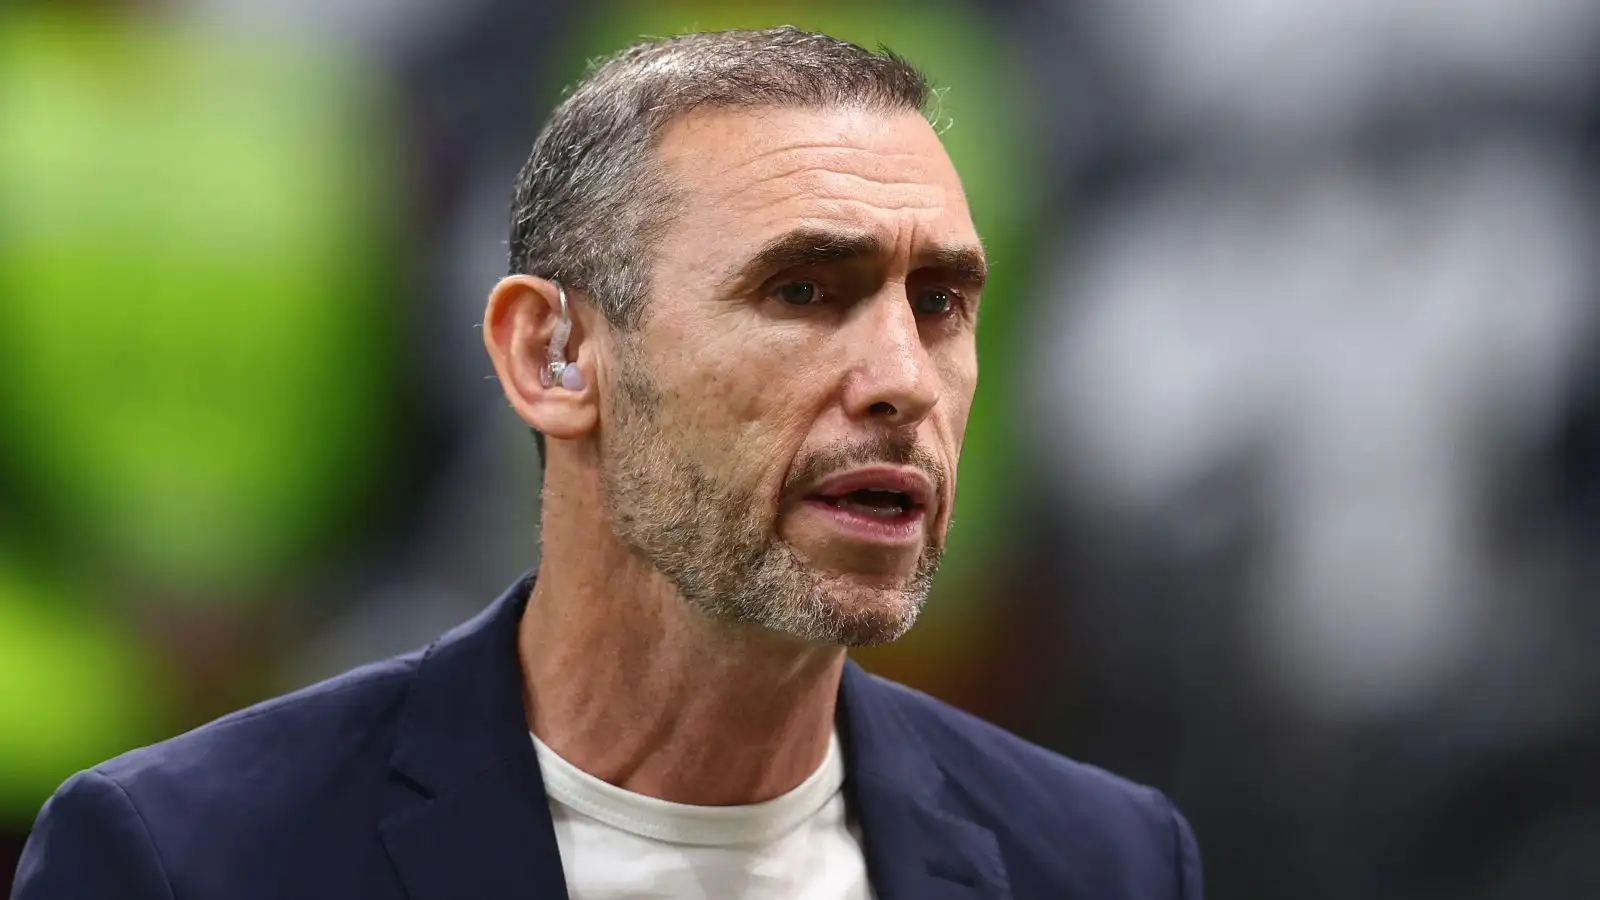 Arsenal defenders 'can't trust' Matt Turner as legend Martin Keown hits out  at goalkeeper's mistakes in Europa League